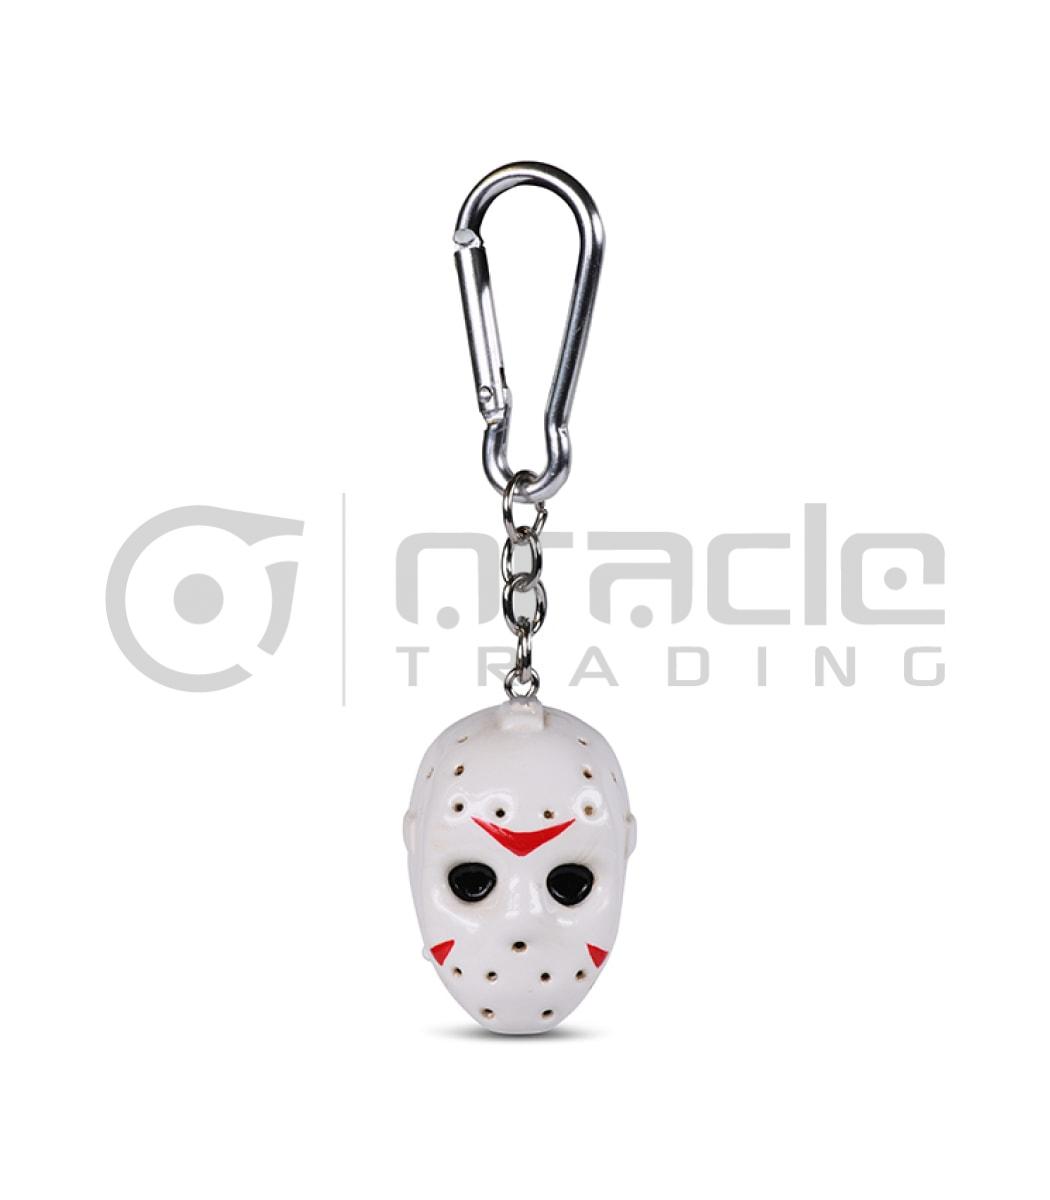 Friday the 13th 3D Keychain